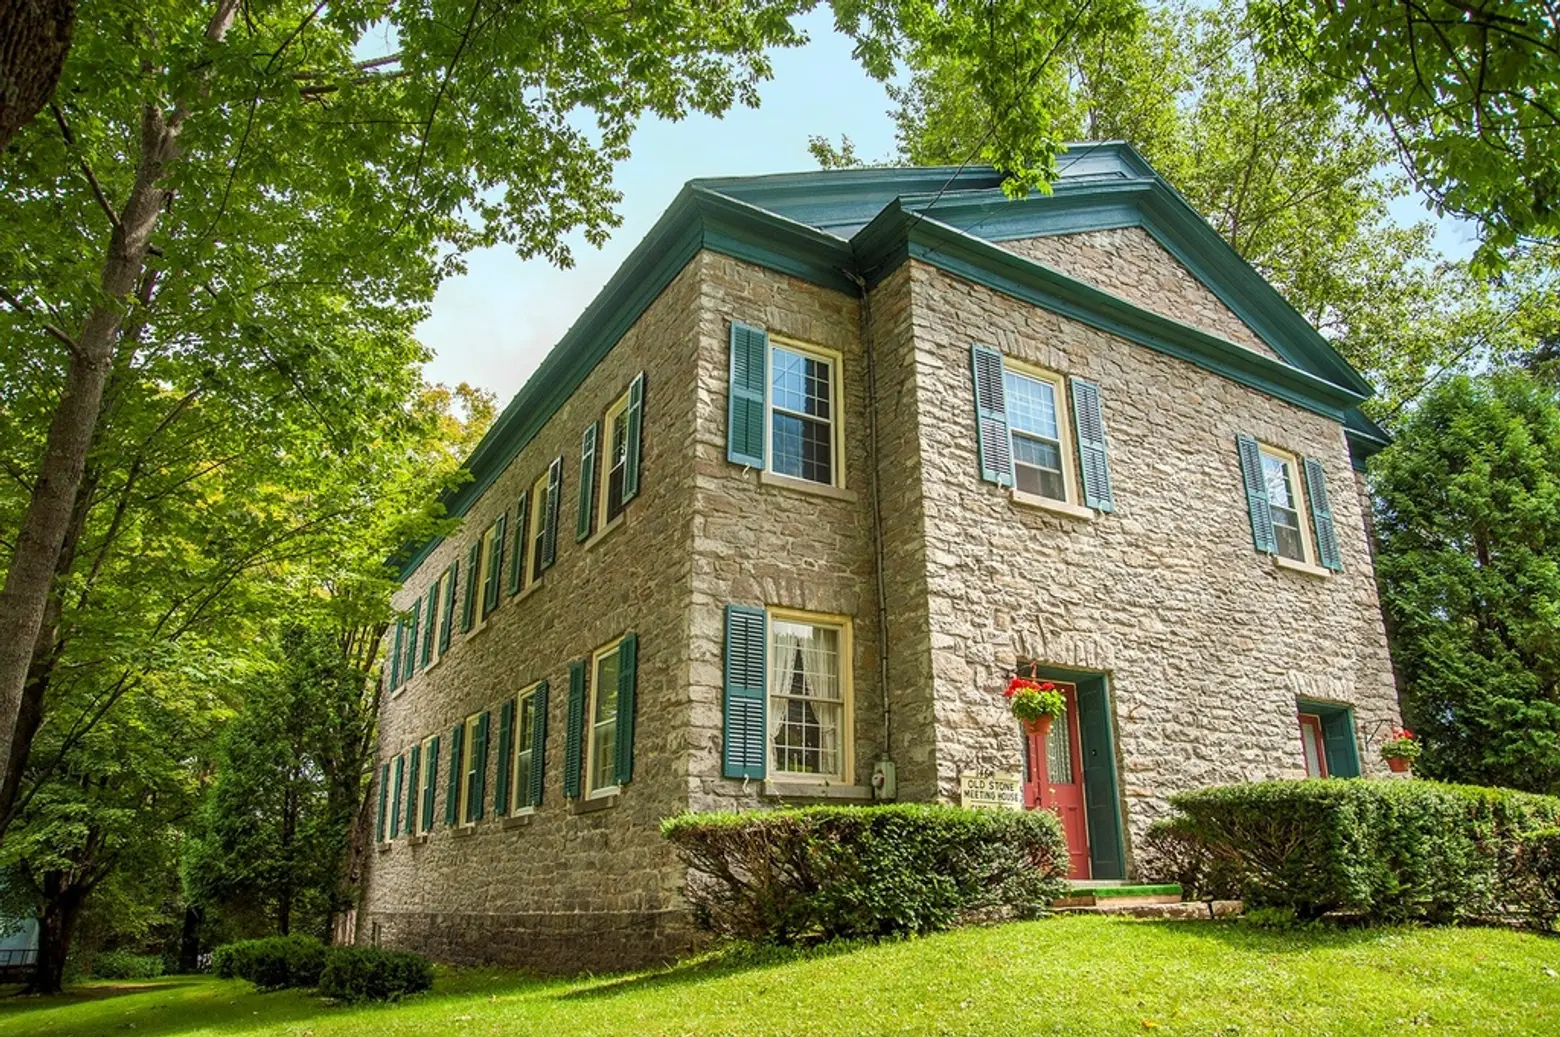 It’s Only $275,000 to Live in This Old Stone Meeting House in Upstate NY